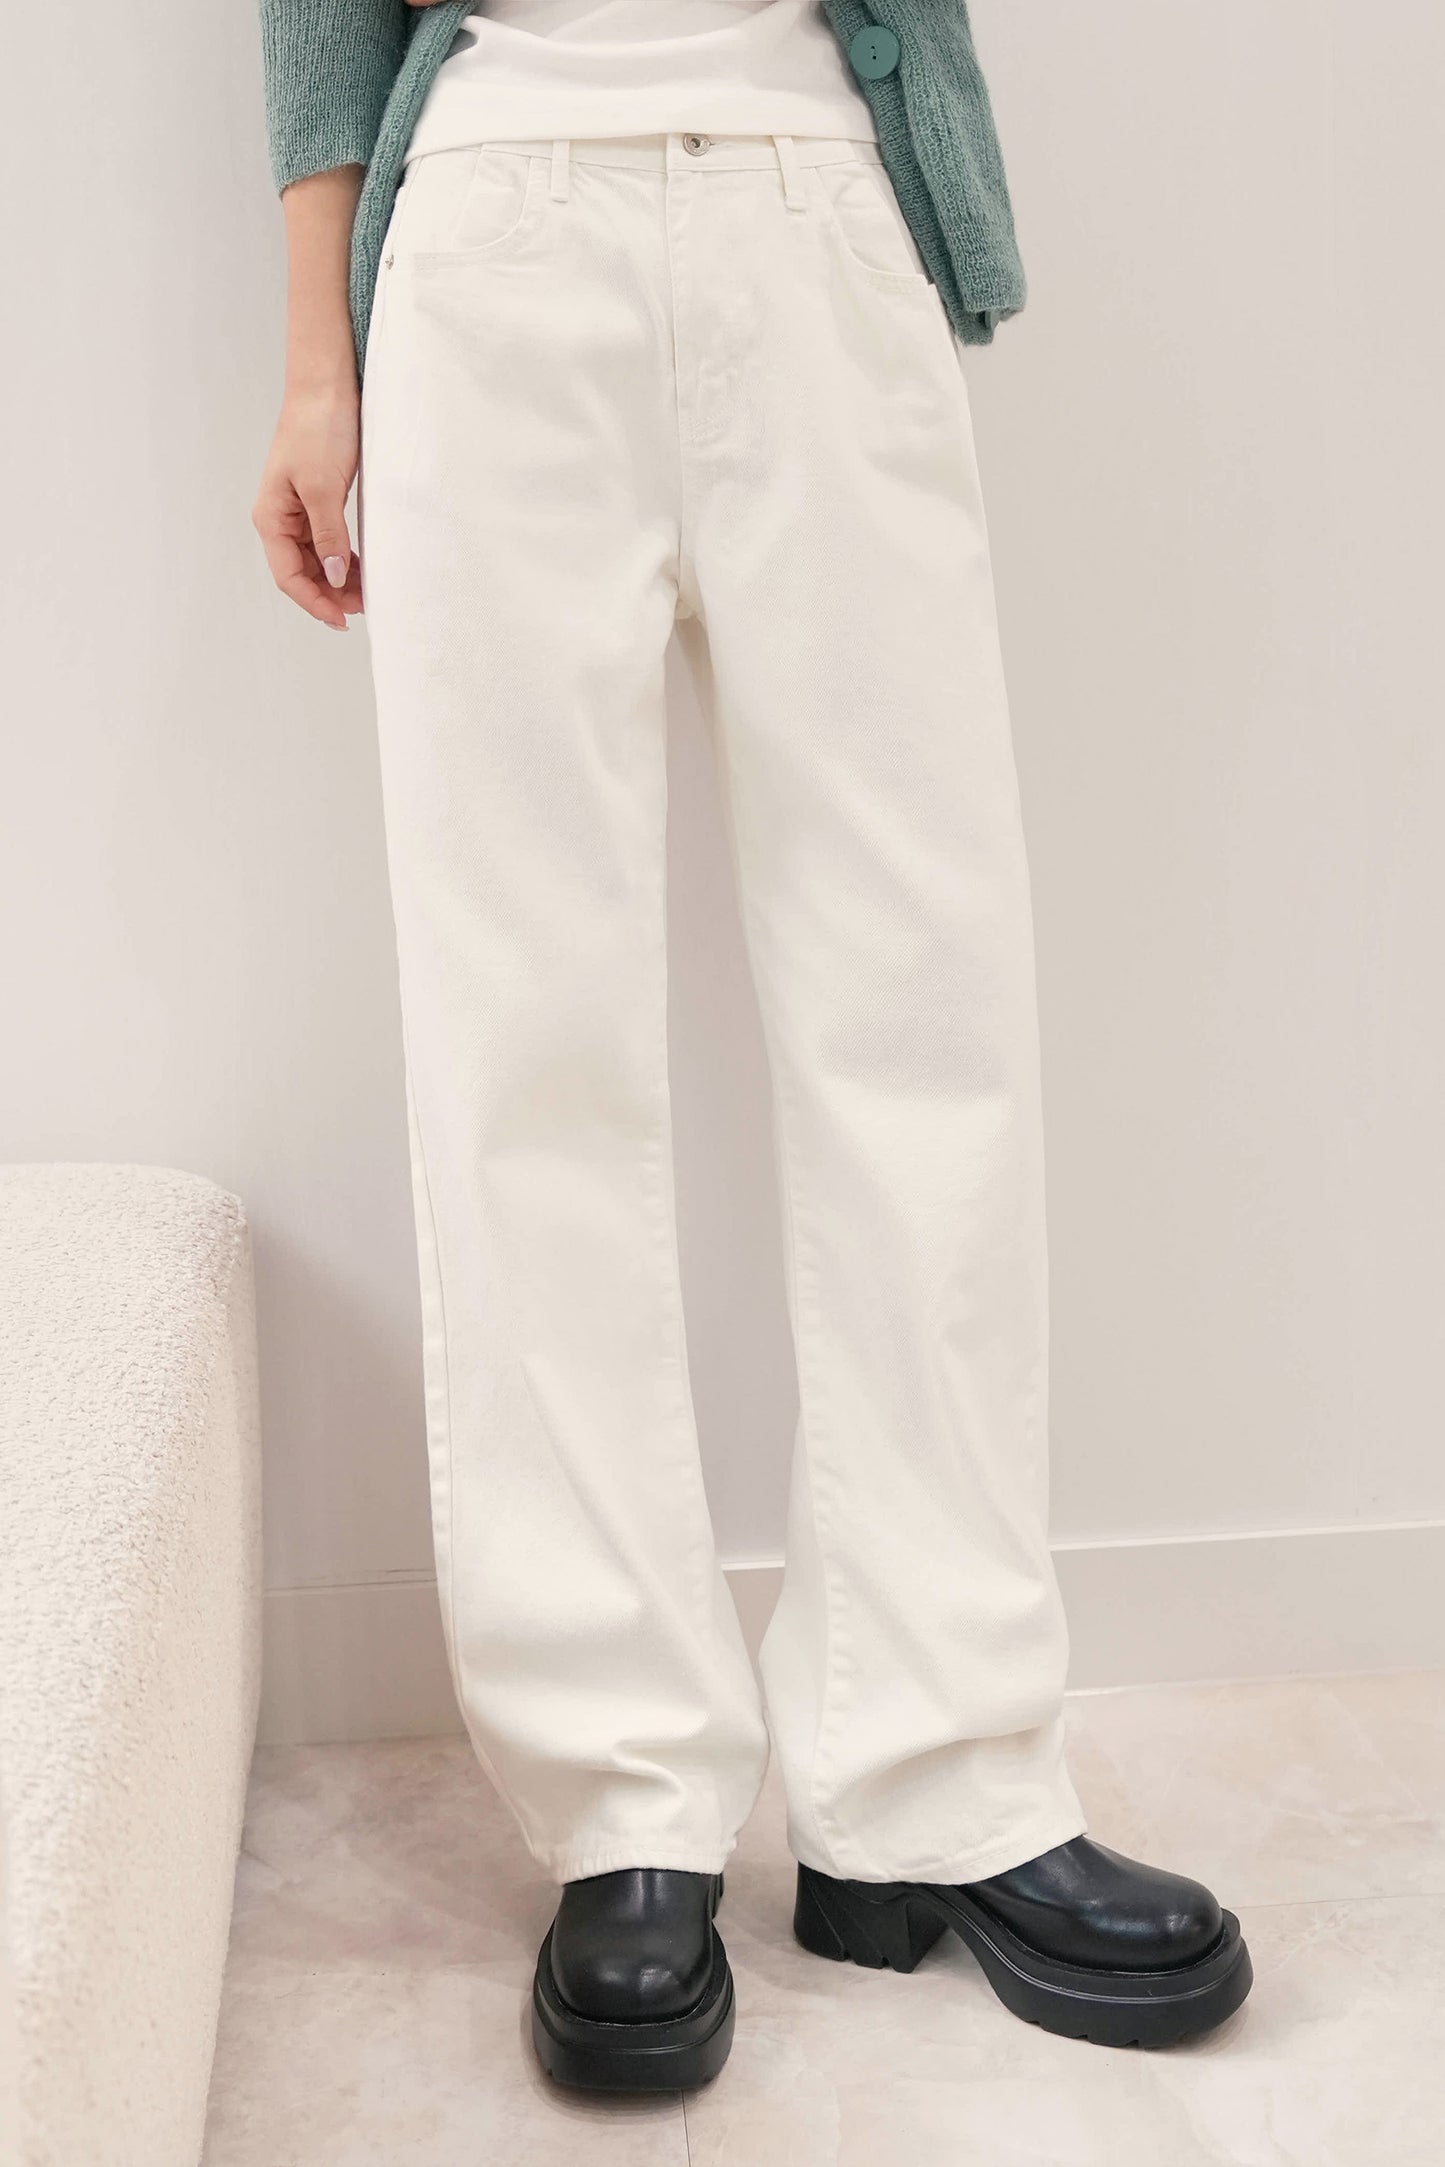 tyche-jeans-white